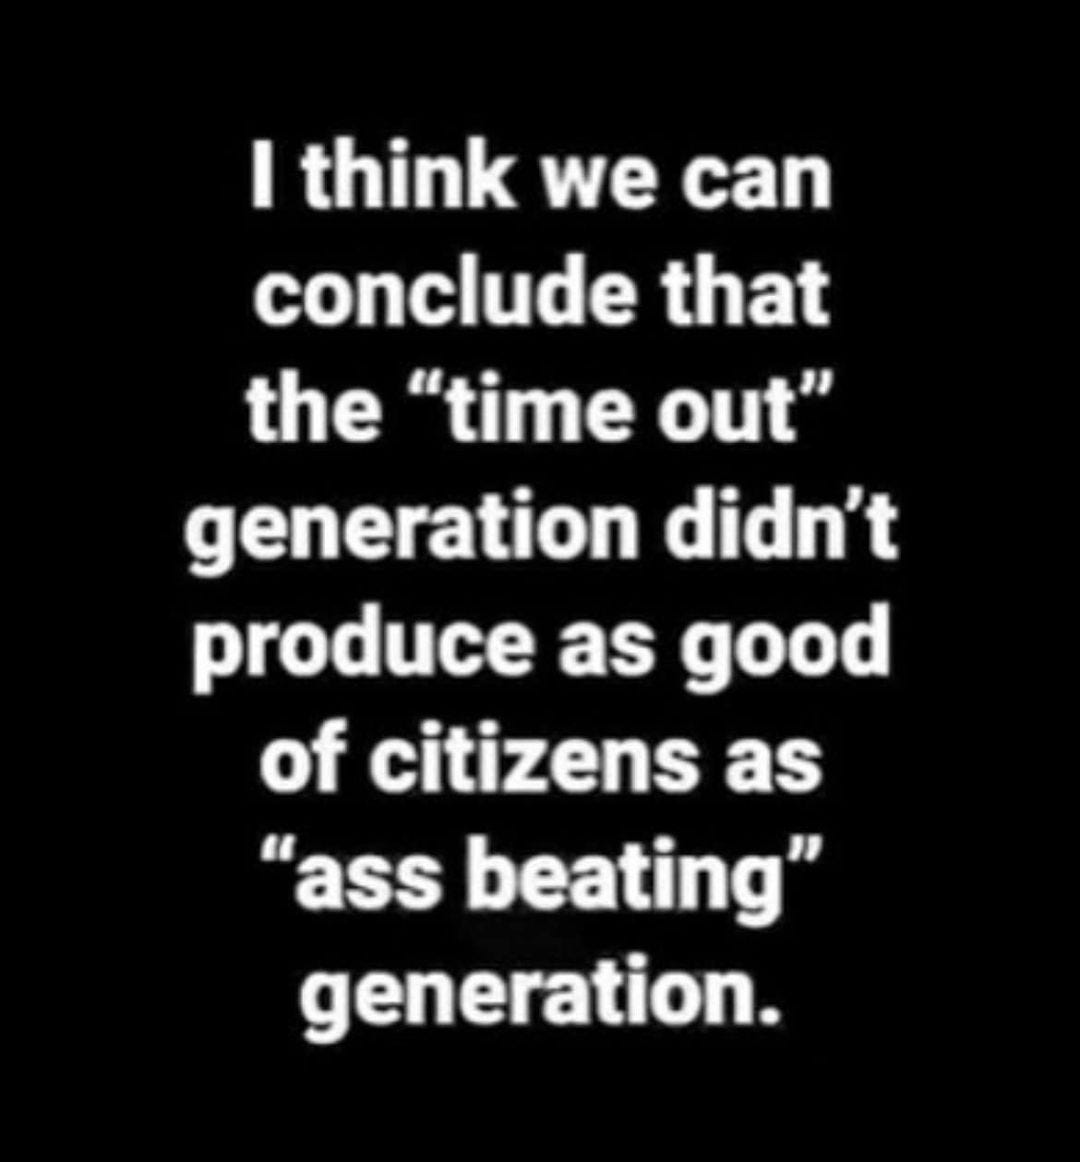 May be an image of text that says 'I think we can conclude that the "time out" generation didn't produce as good of citizens as "ass beating" generation.'